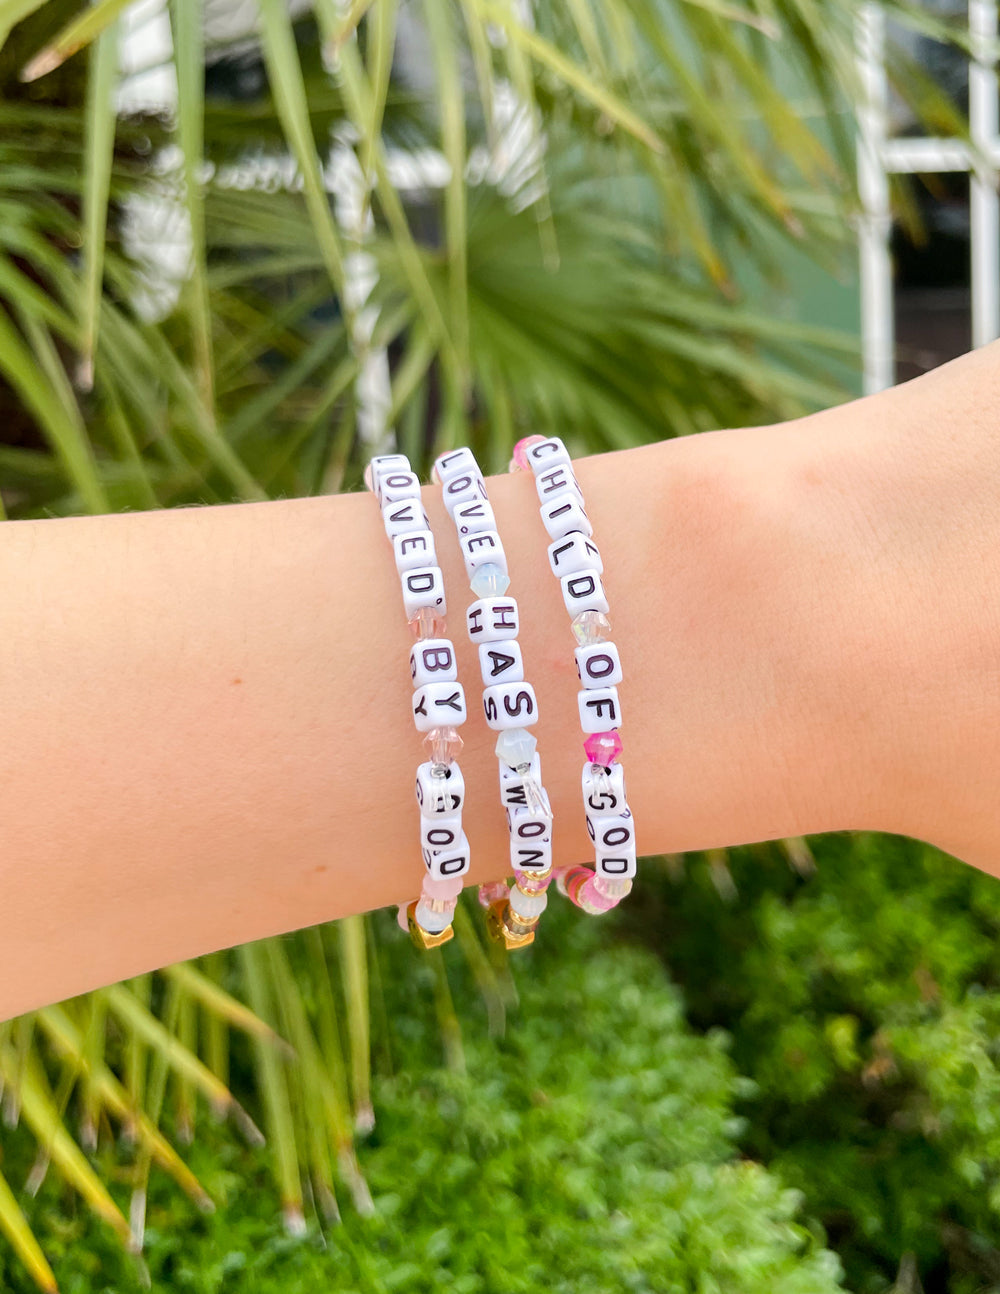 Products :: 7.5-Inch Period Tracker Bracelet, Teen gift for body positivity  and education, Great present for woman's day